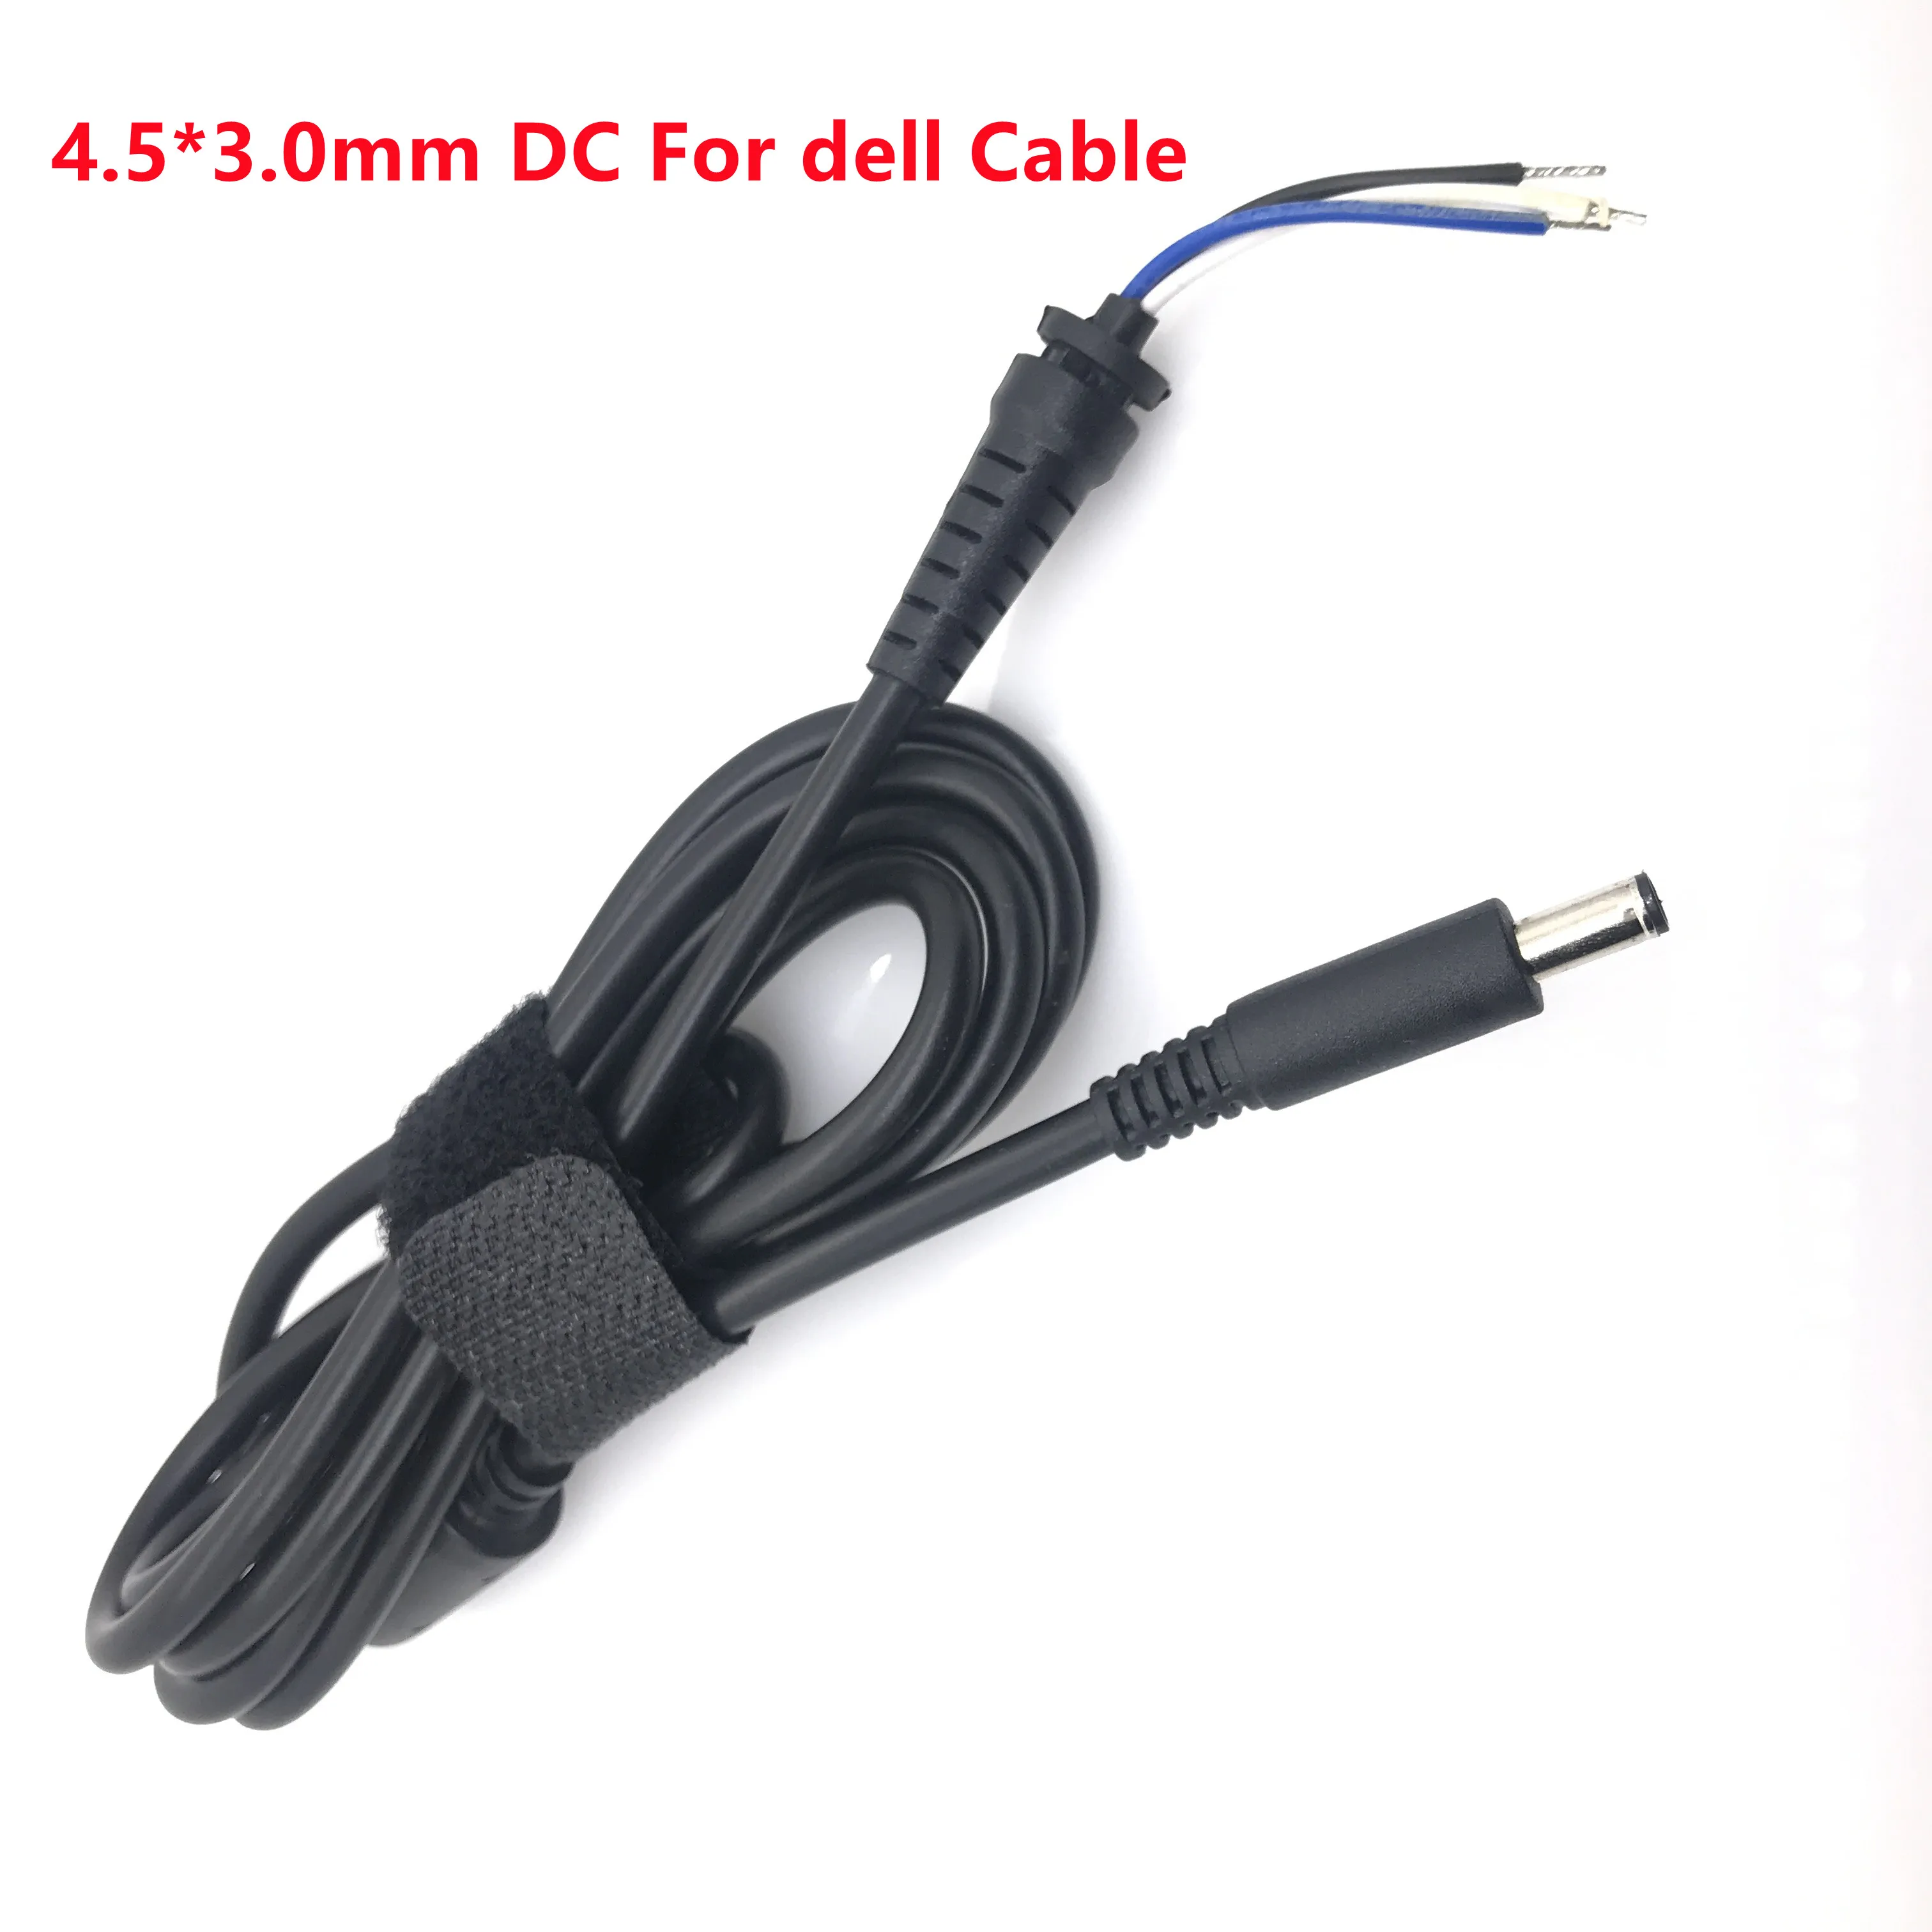 Dc 4.5x3.0 mm/4.5*3.0 mm DC Power Male Tip Plug Connector With Cord / Cable for Dell Laptop Power Adapter Charger